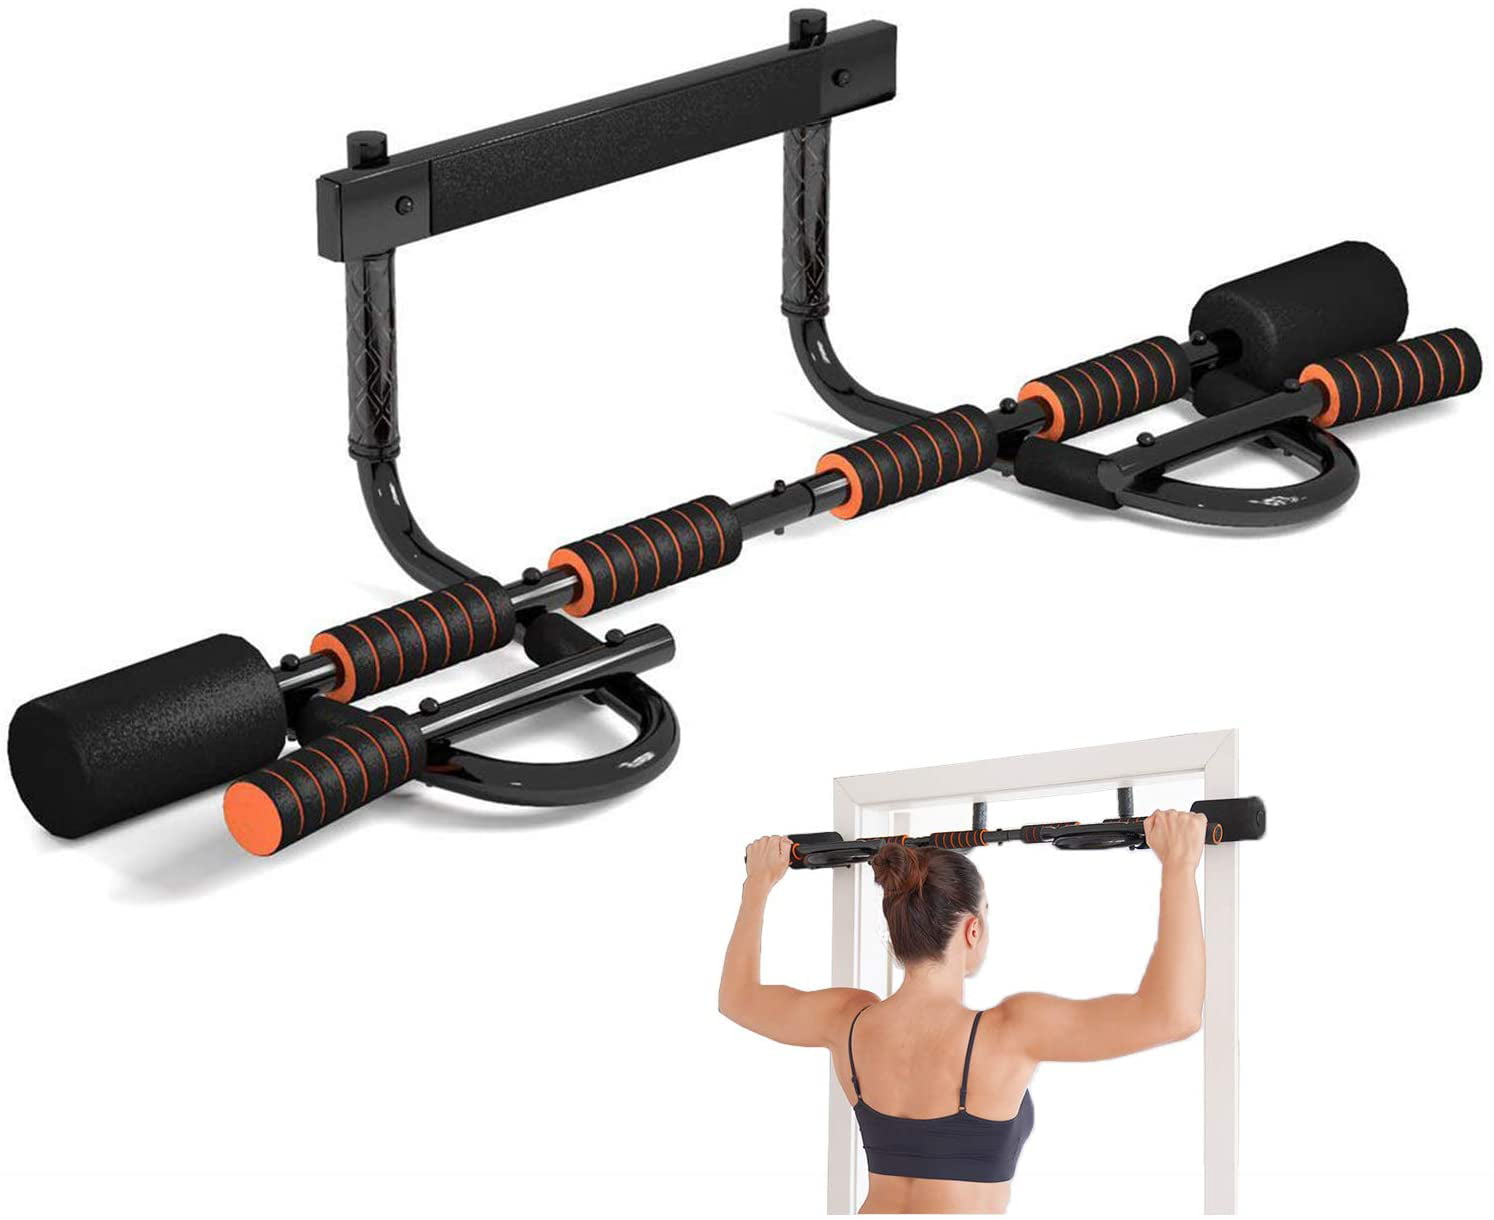 Pullup Bars Fitness for Home MKHS Pull up bar for Doorway fit to Door Width 28-36 Heavy Duty Portable Exercise bar for Home Gym Exercise Fitness & up to 790lbs Chin up bar Doorway no Screws